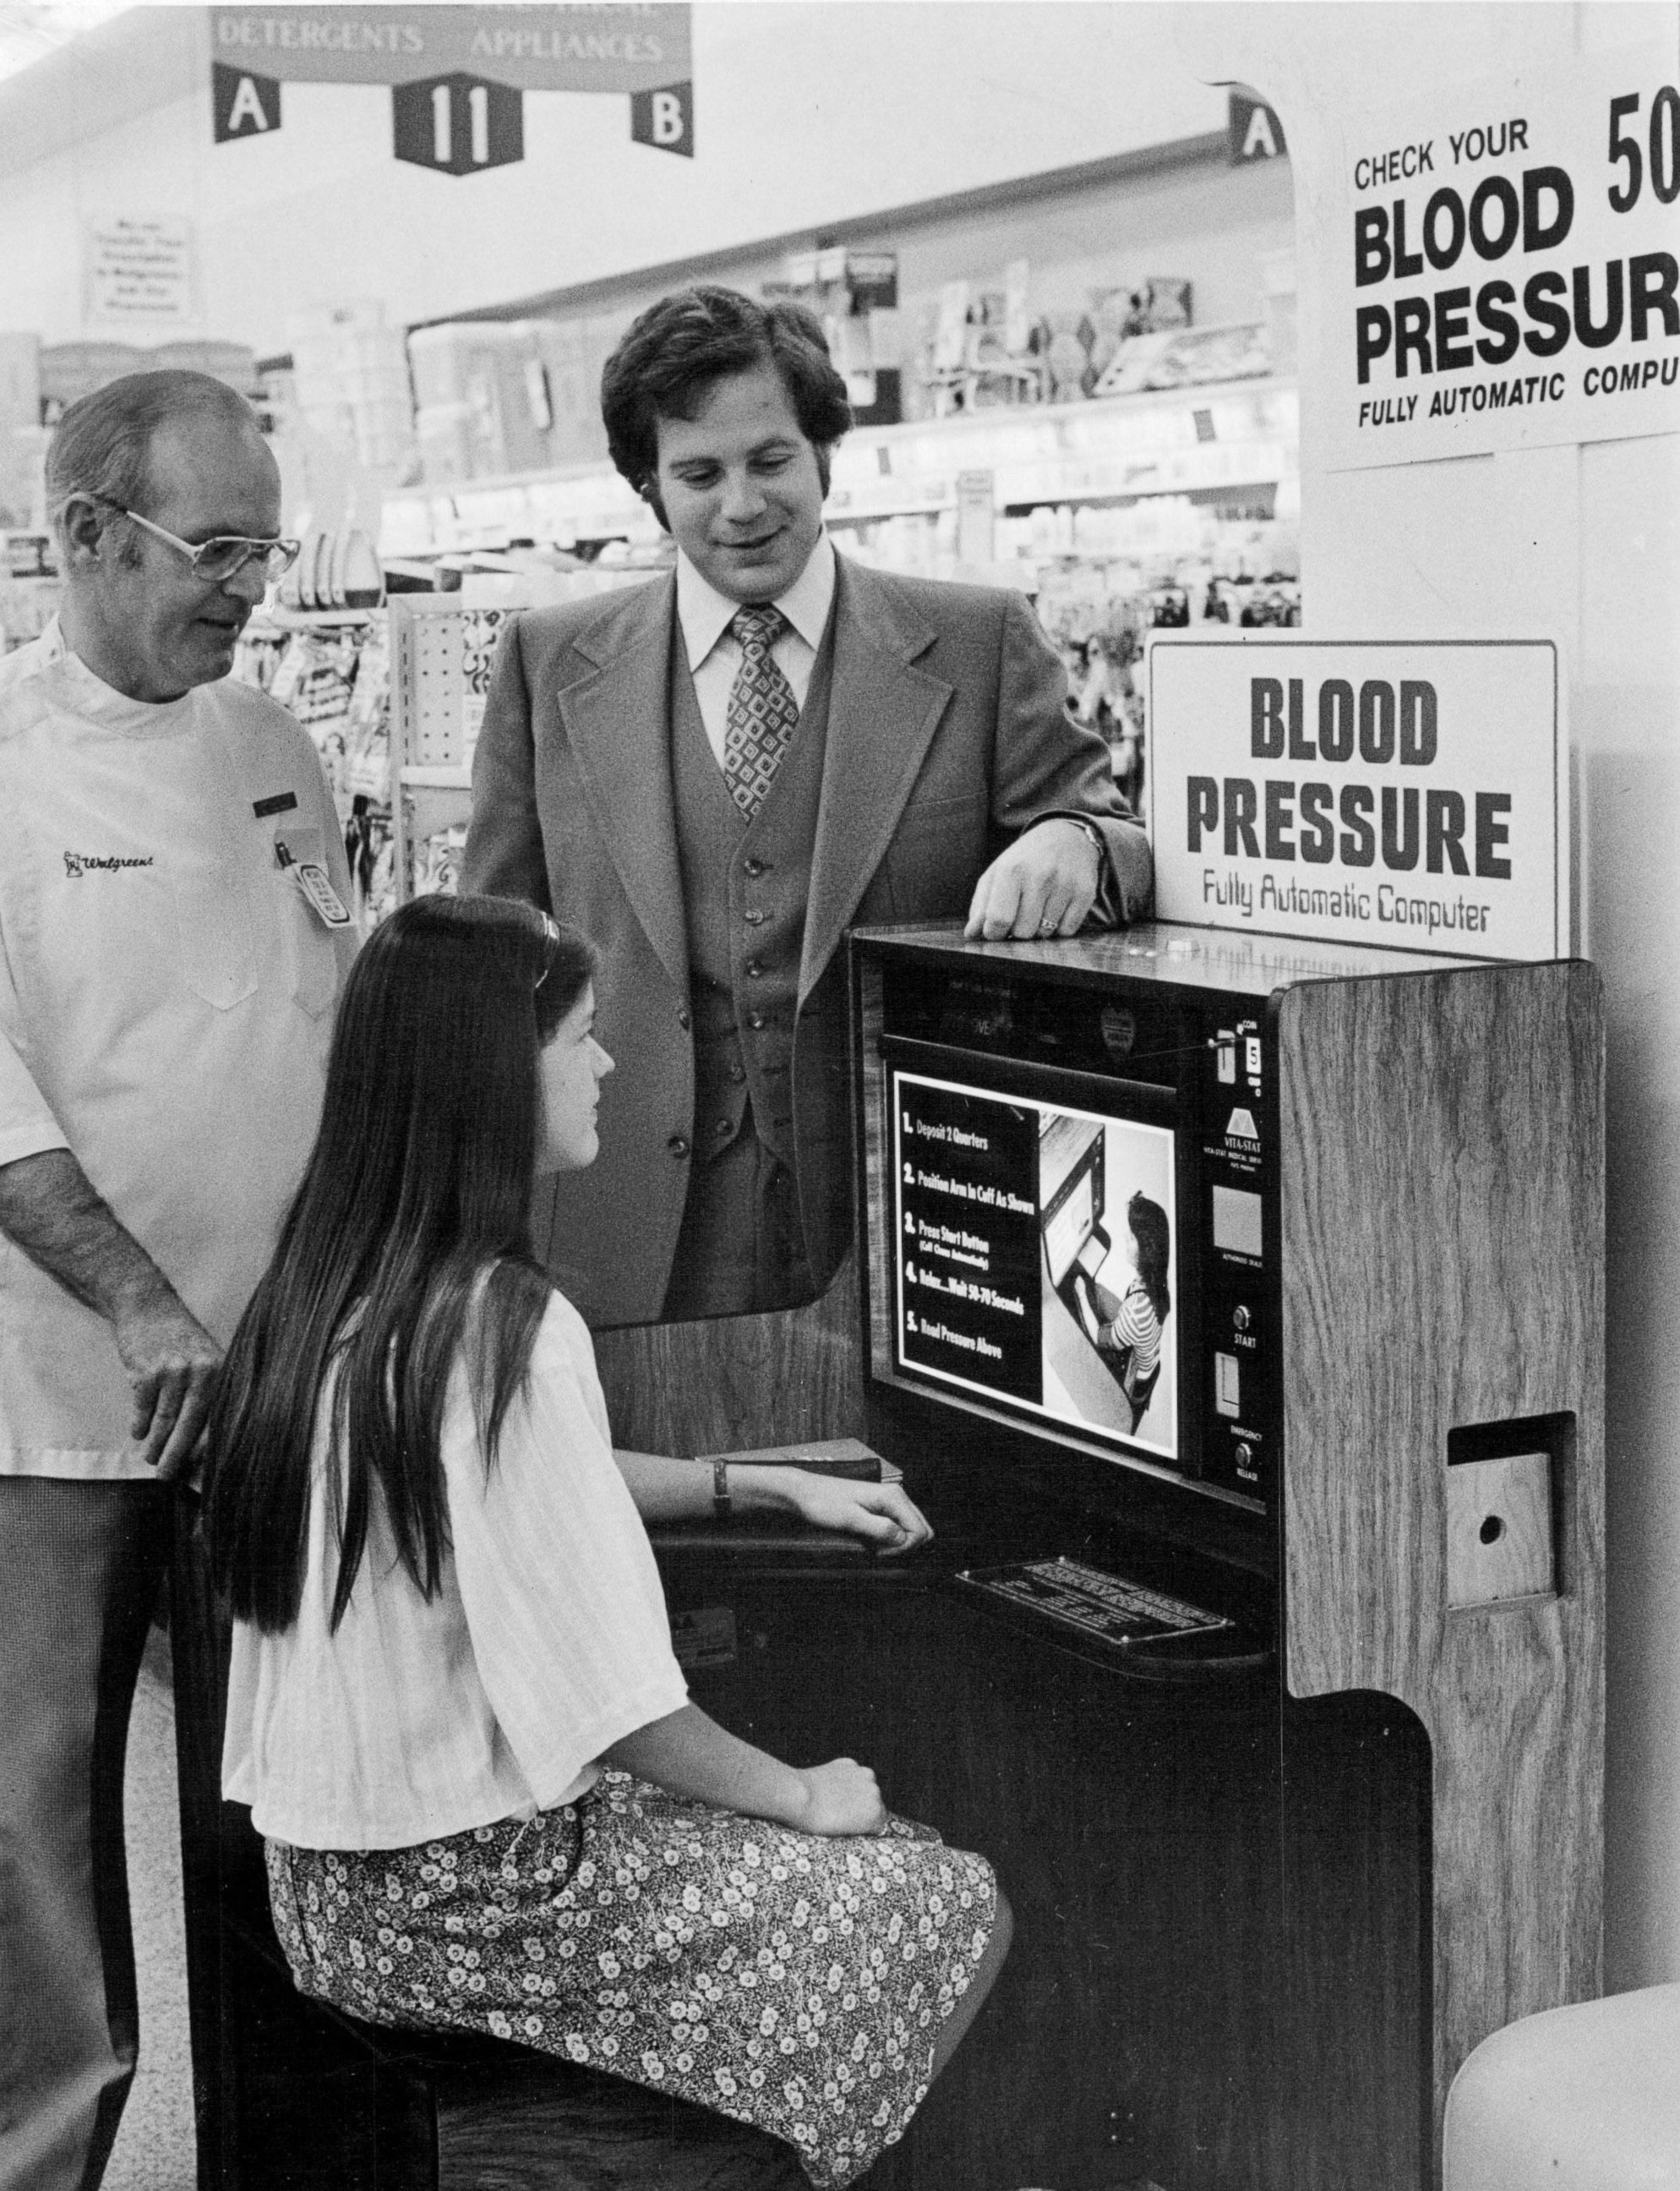 PHOTO: Walgreens employees try out an automatic blood-pressure testing machine in Denver, this May 27, 1977 file photo.